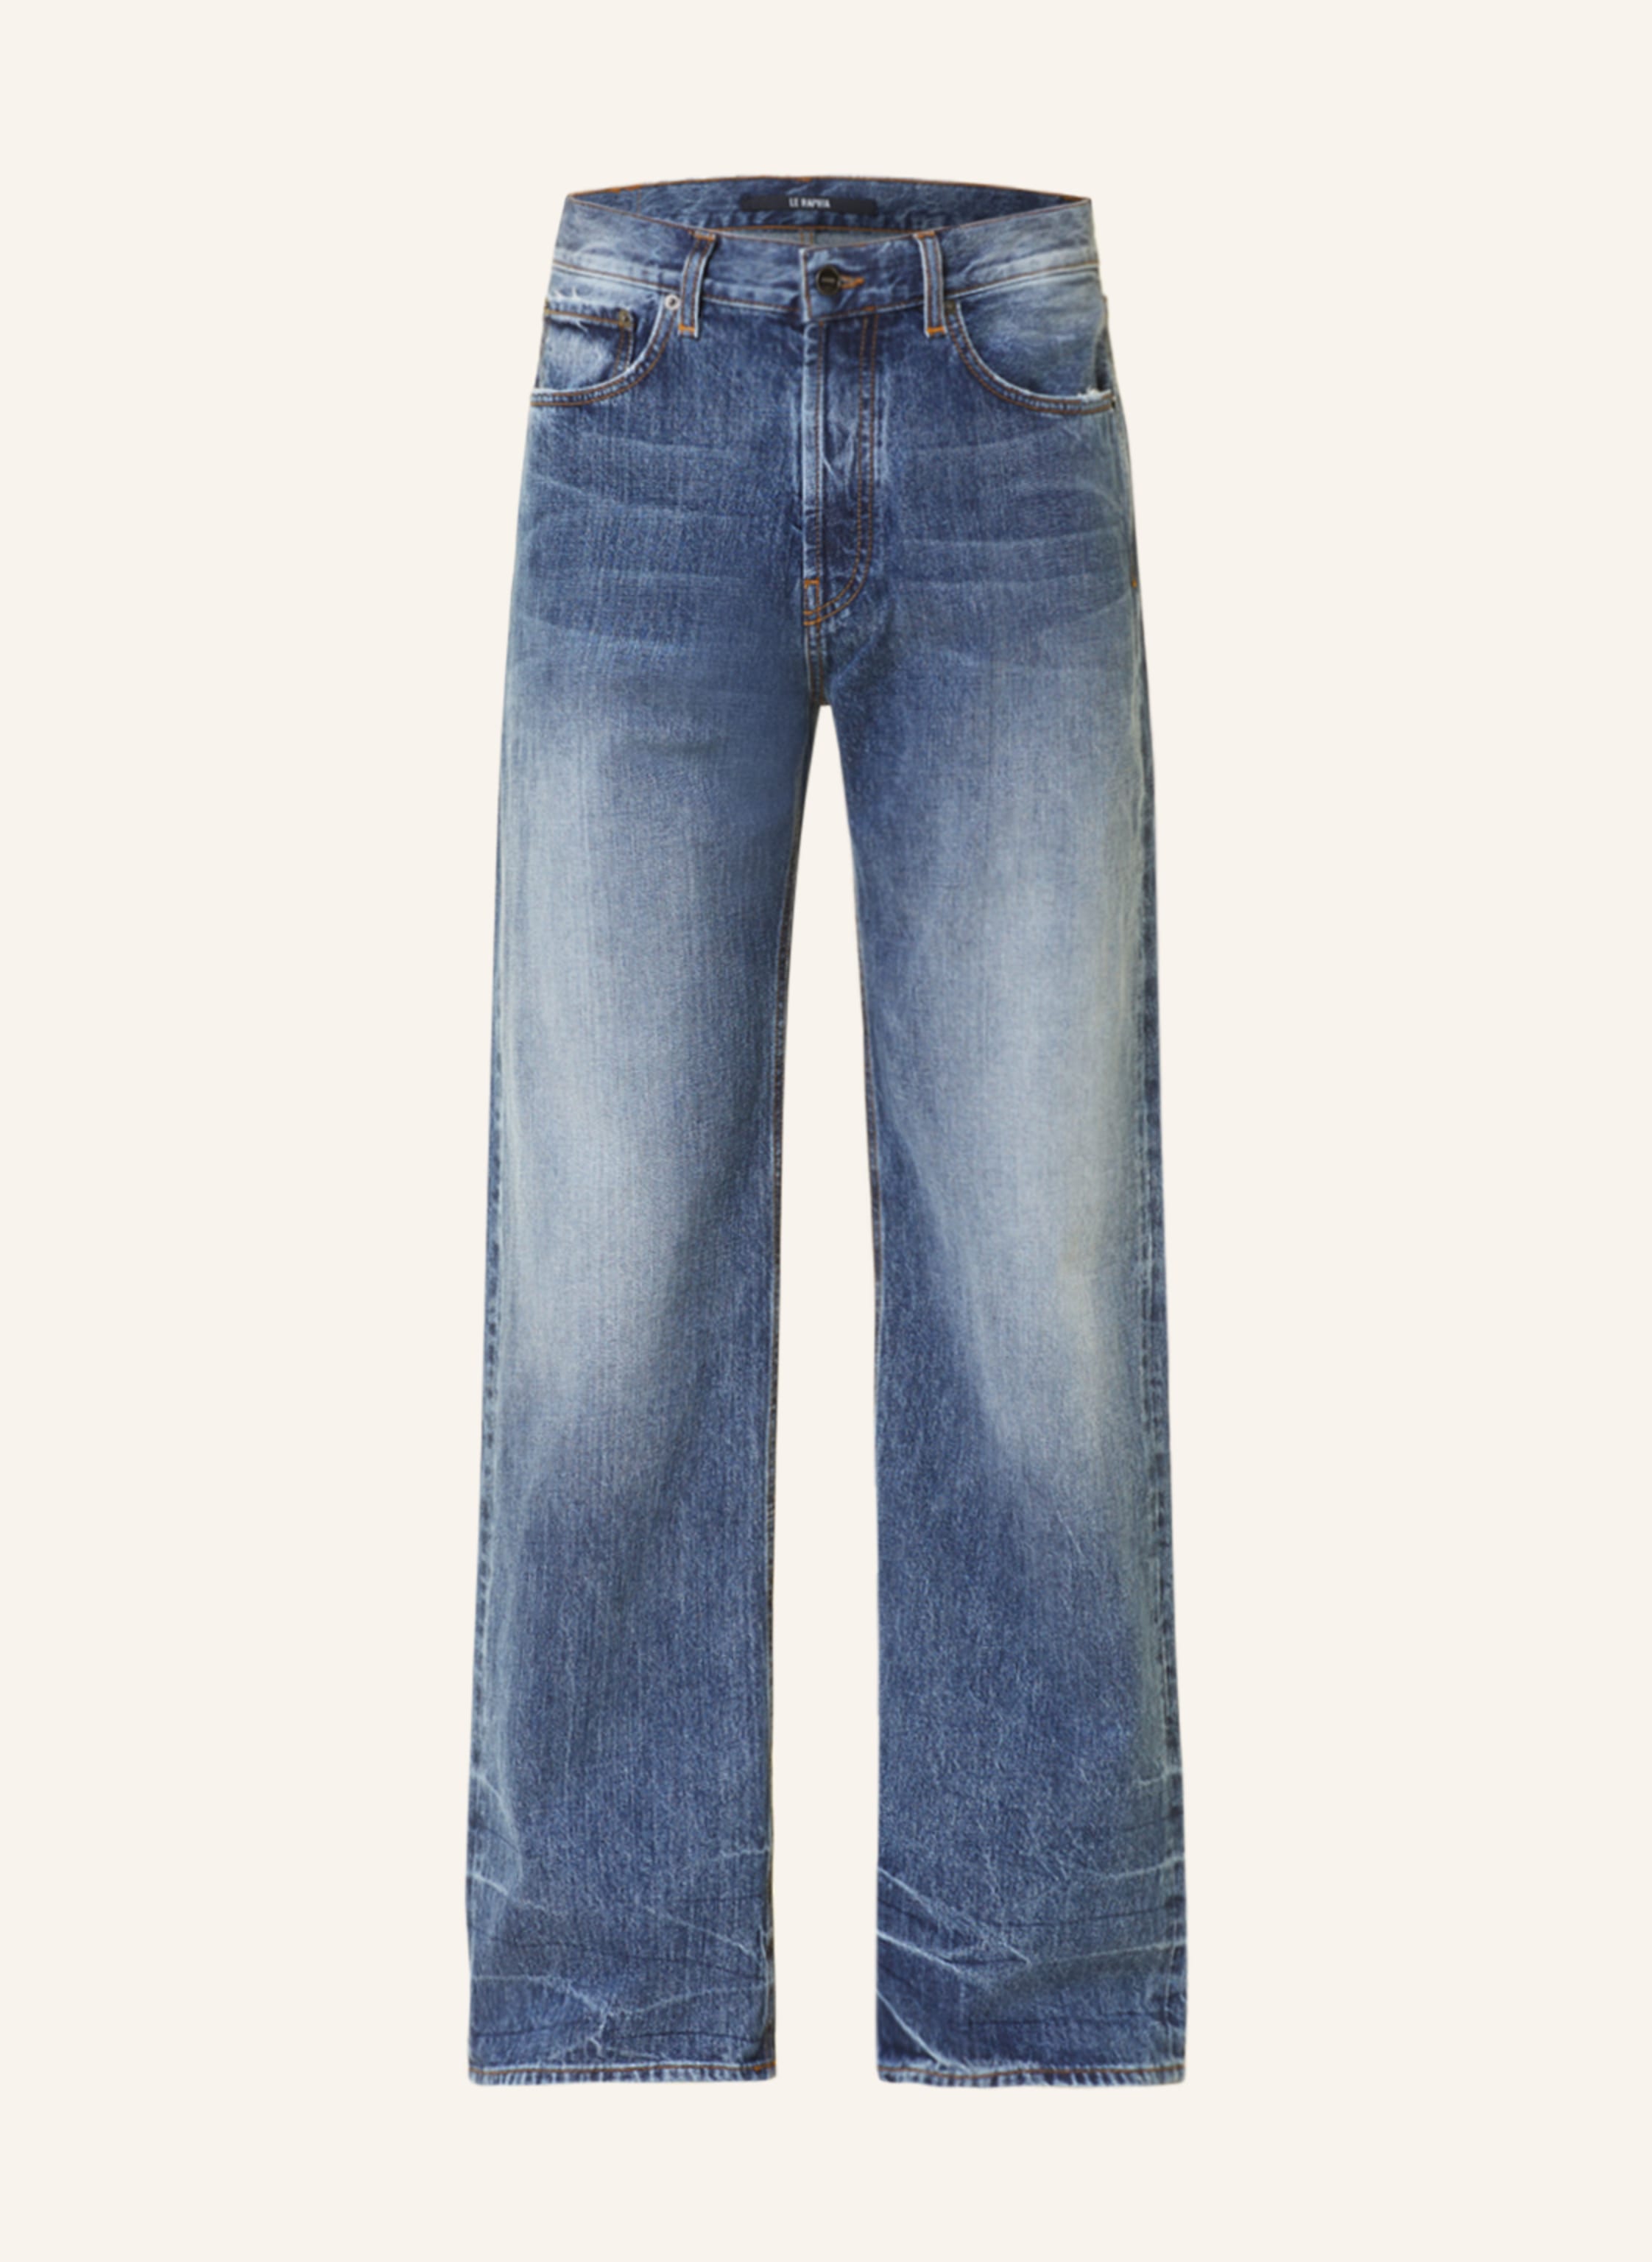 JACQUEMUS Jeans LE DE-NIMES SUNO straight fit in 33b blue/tabac ...